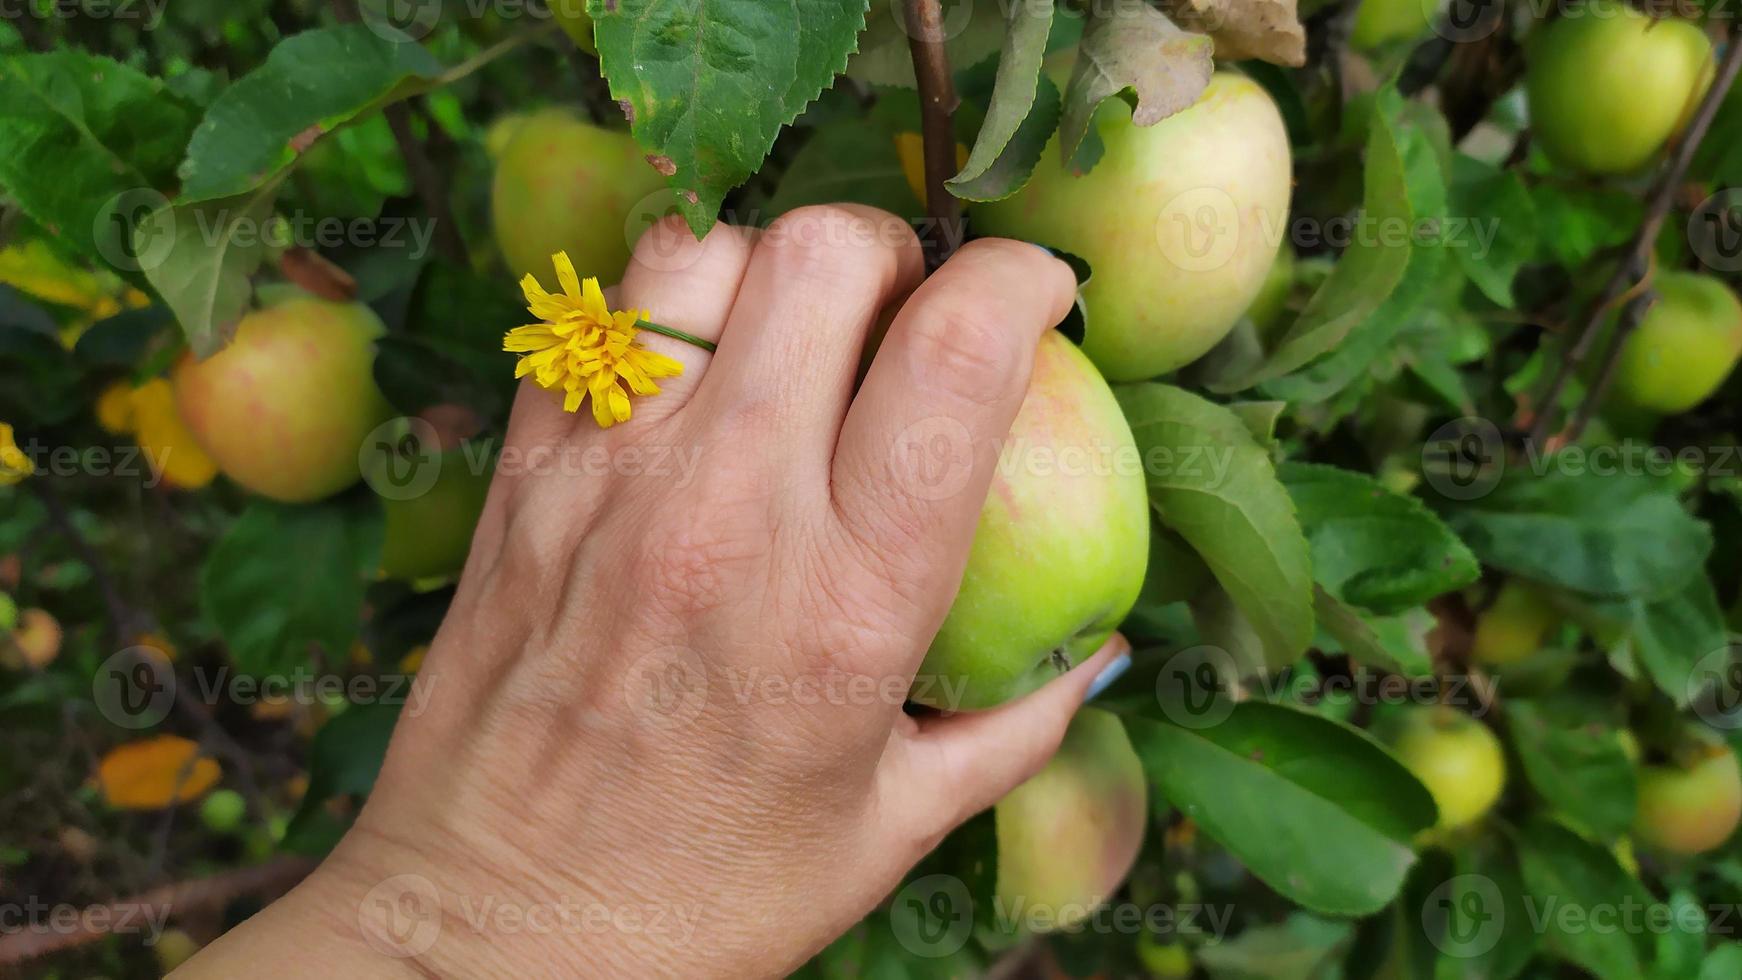 A woman's hand picks an apple from an apple tree. Harvesting apples in autumn. photo